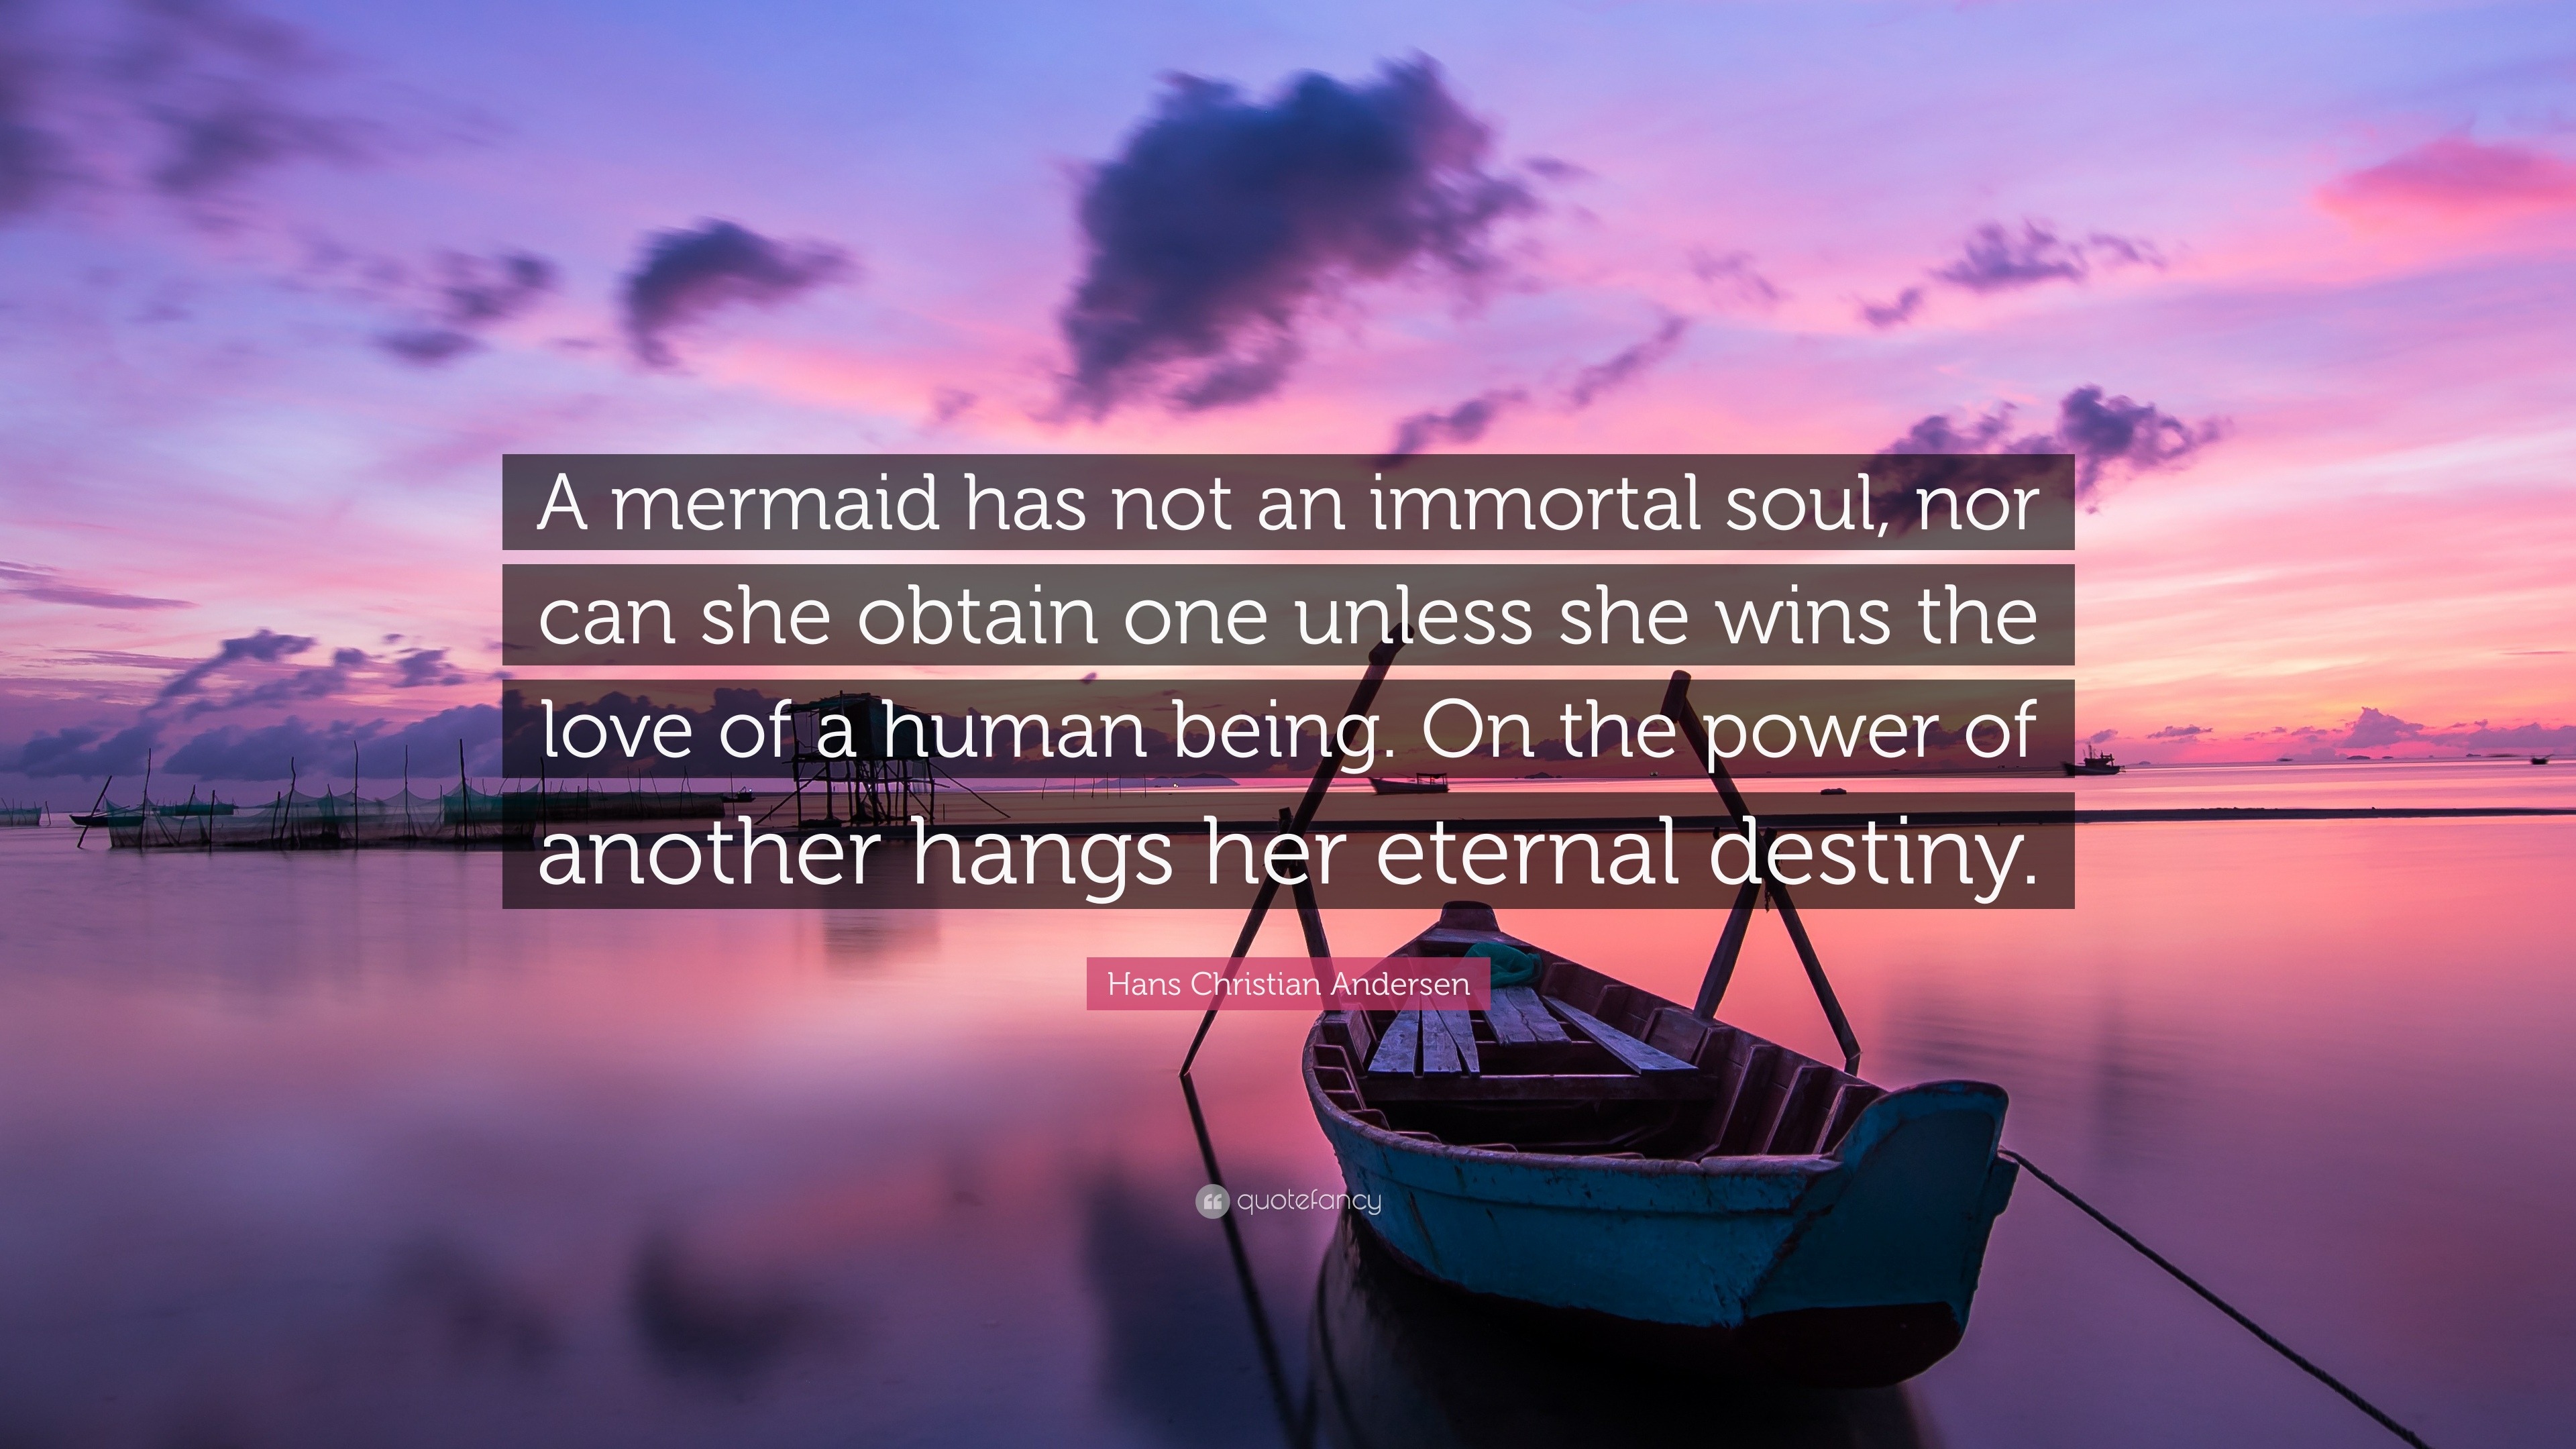 Hans Christian Andersen Quote “A mermaid has not an immortal soul nor can